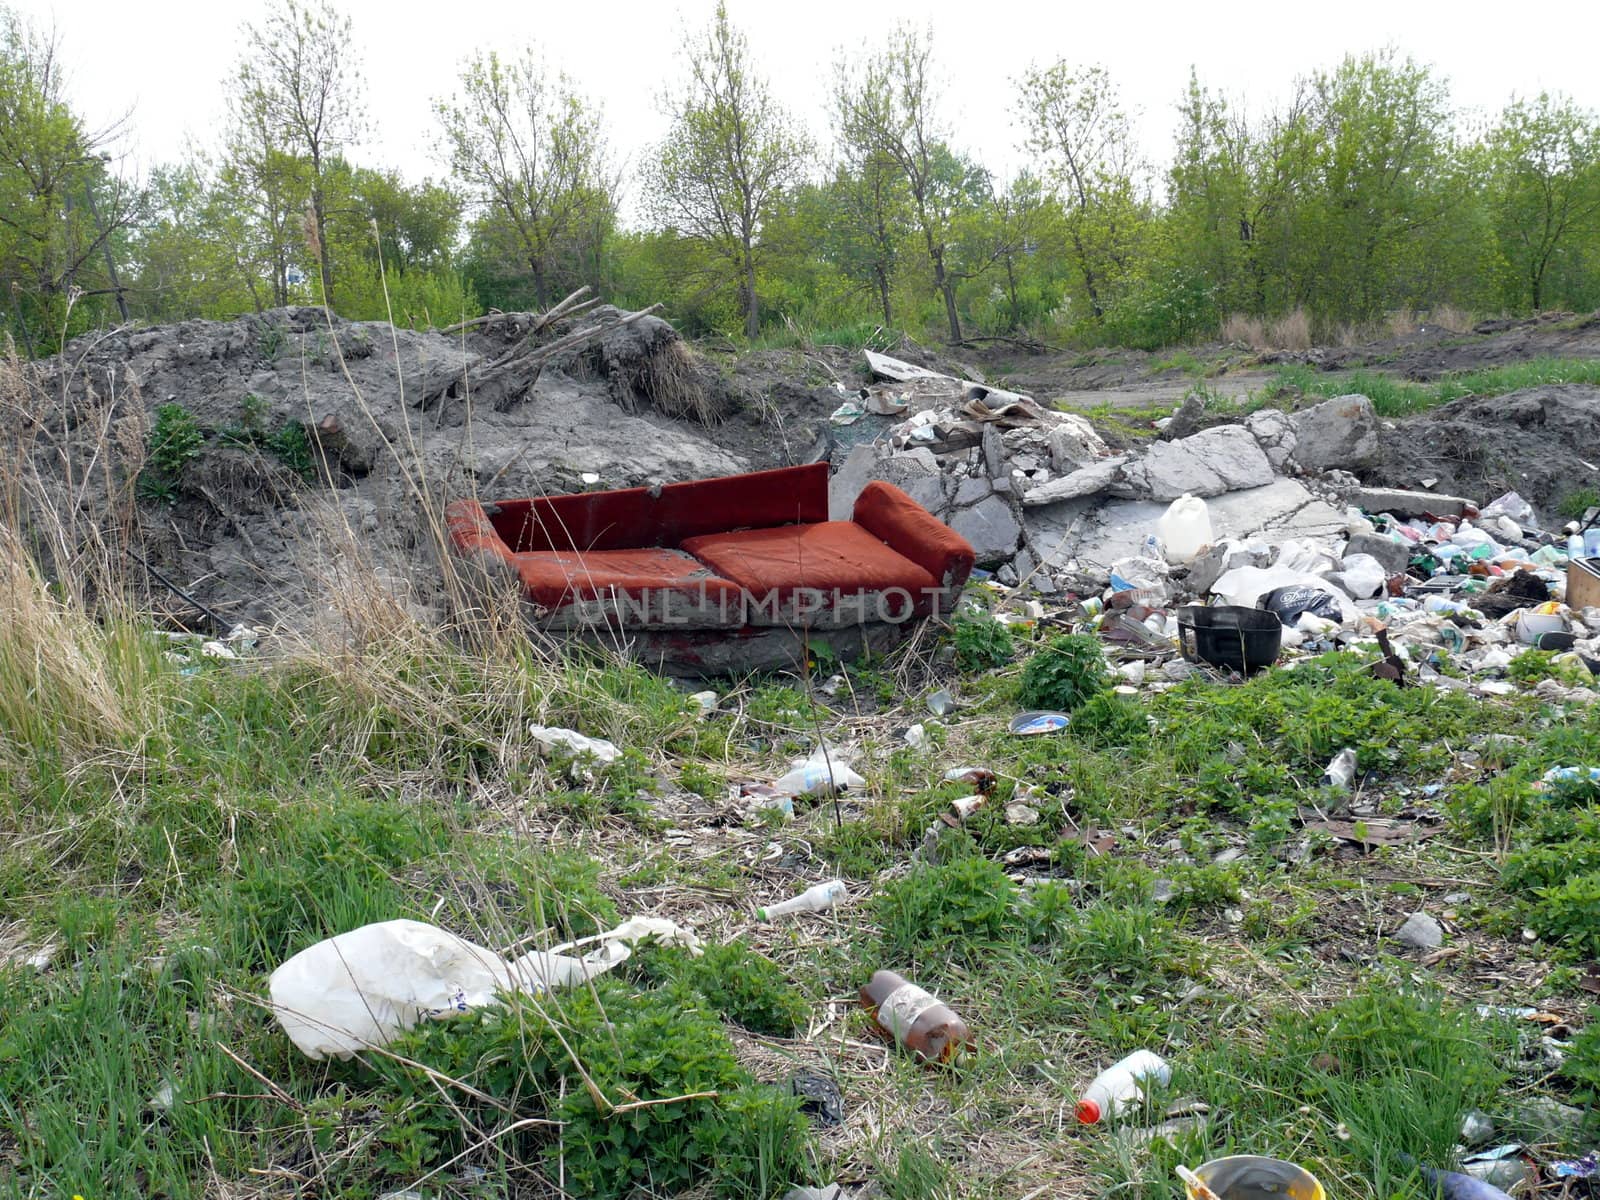 Old red sofa in the dump by Stoyanov